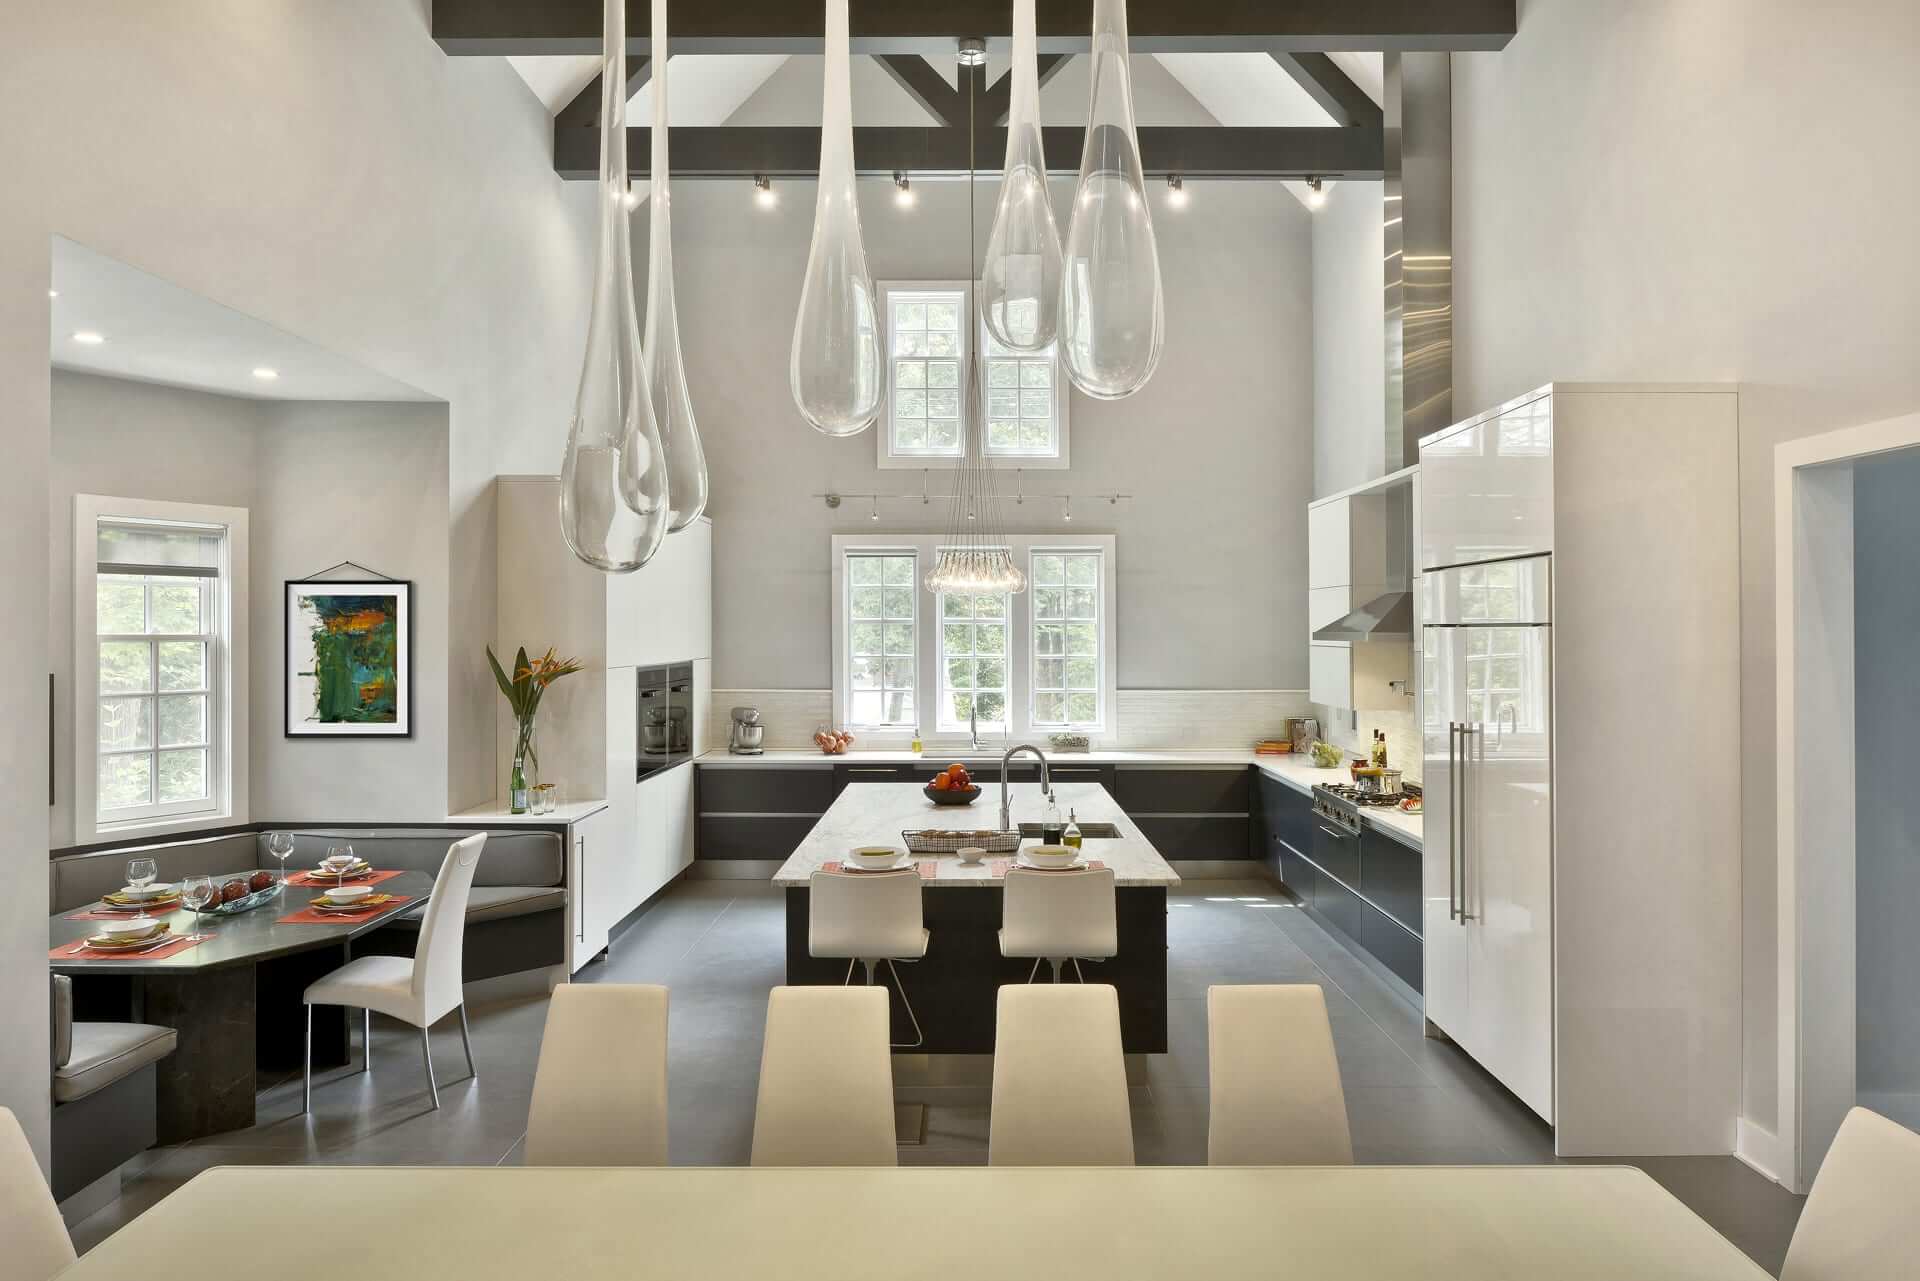 Contemporary Chester, NJ kitchen with soaring ceiling features frameless Artcraft Cabinetry in both high-gloss white finish and dark grey-stained oak.